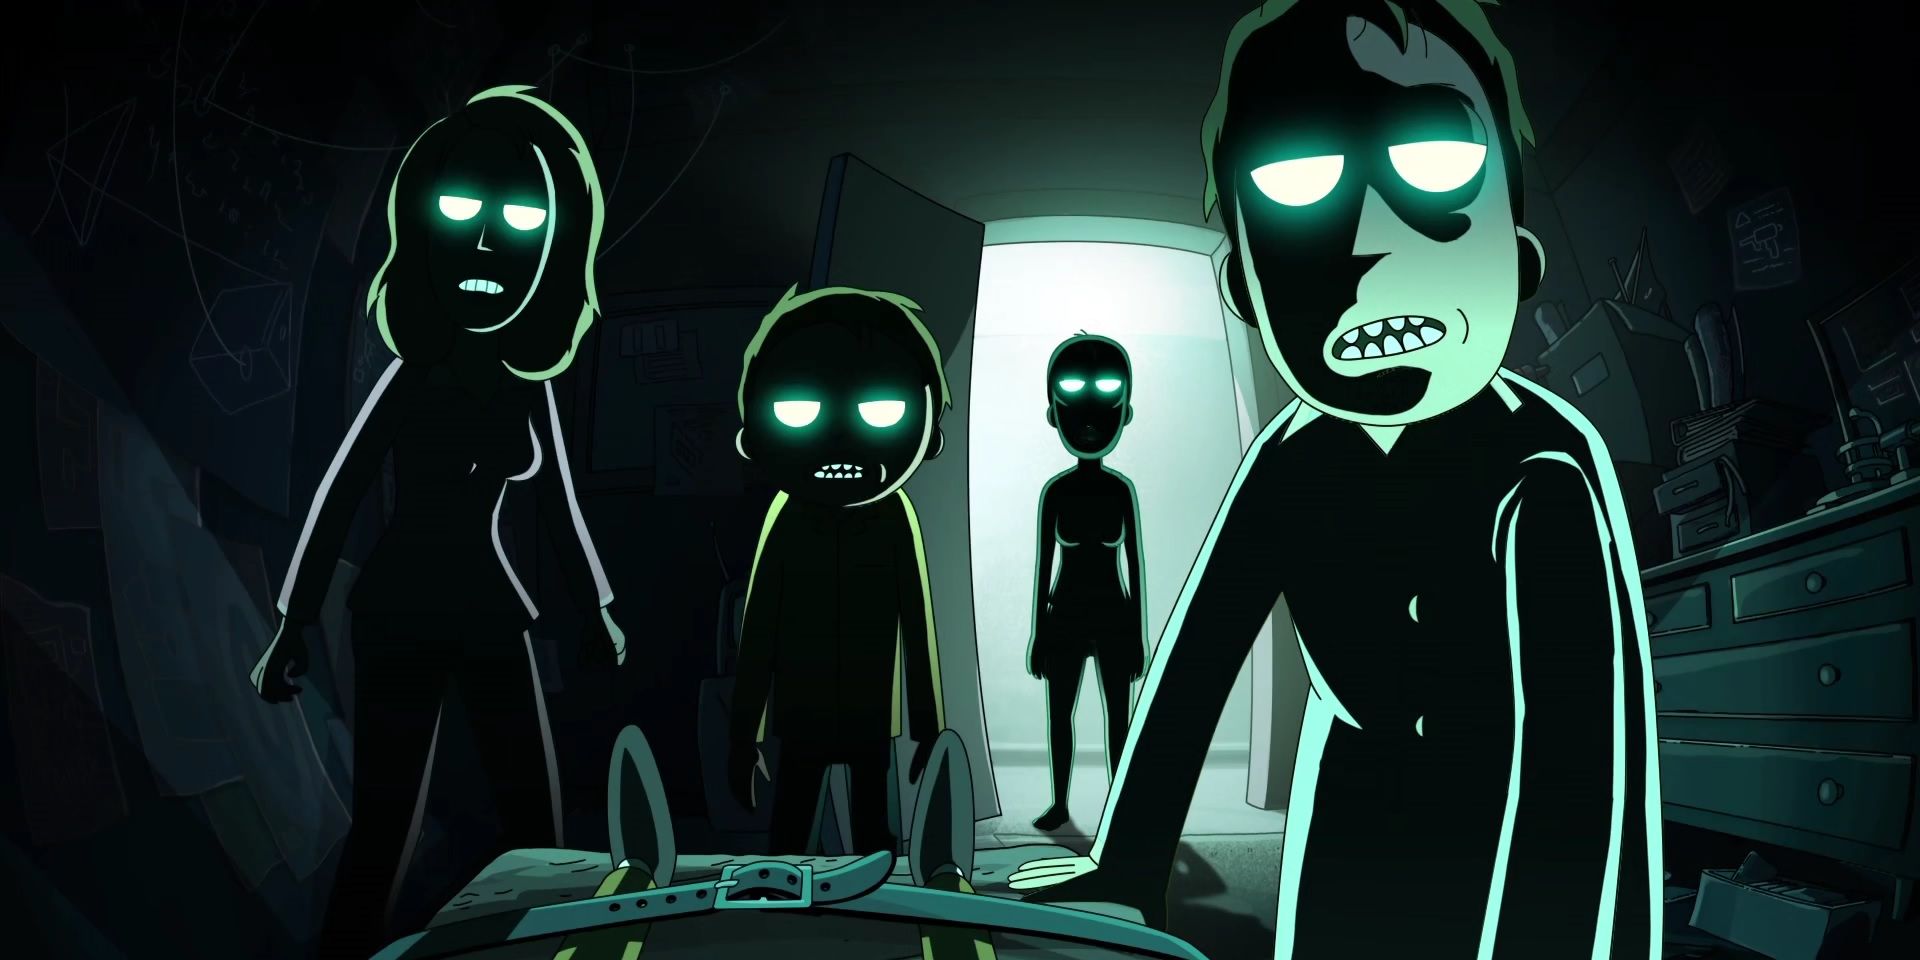 The night family in Rick and Morty